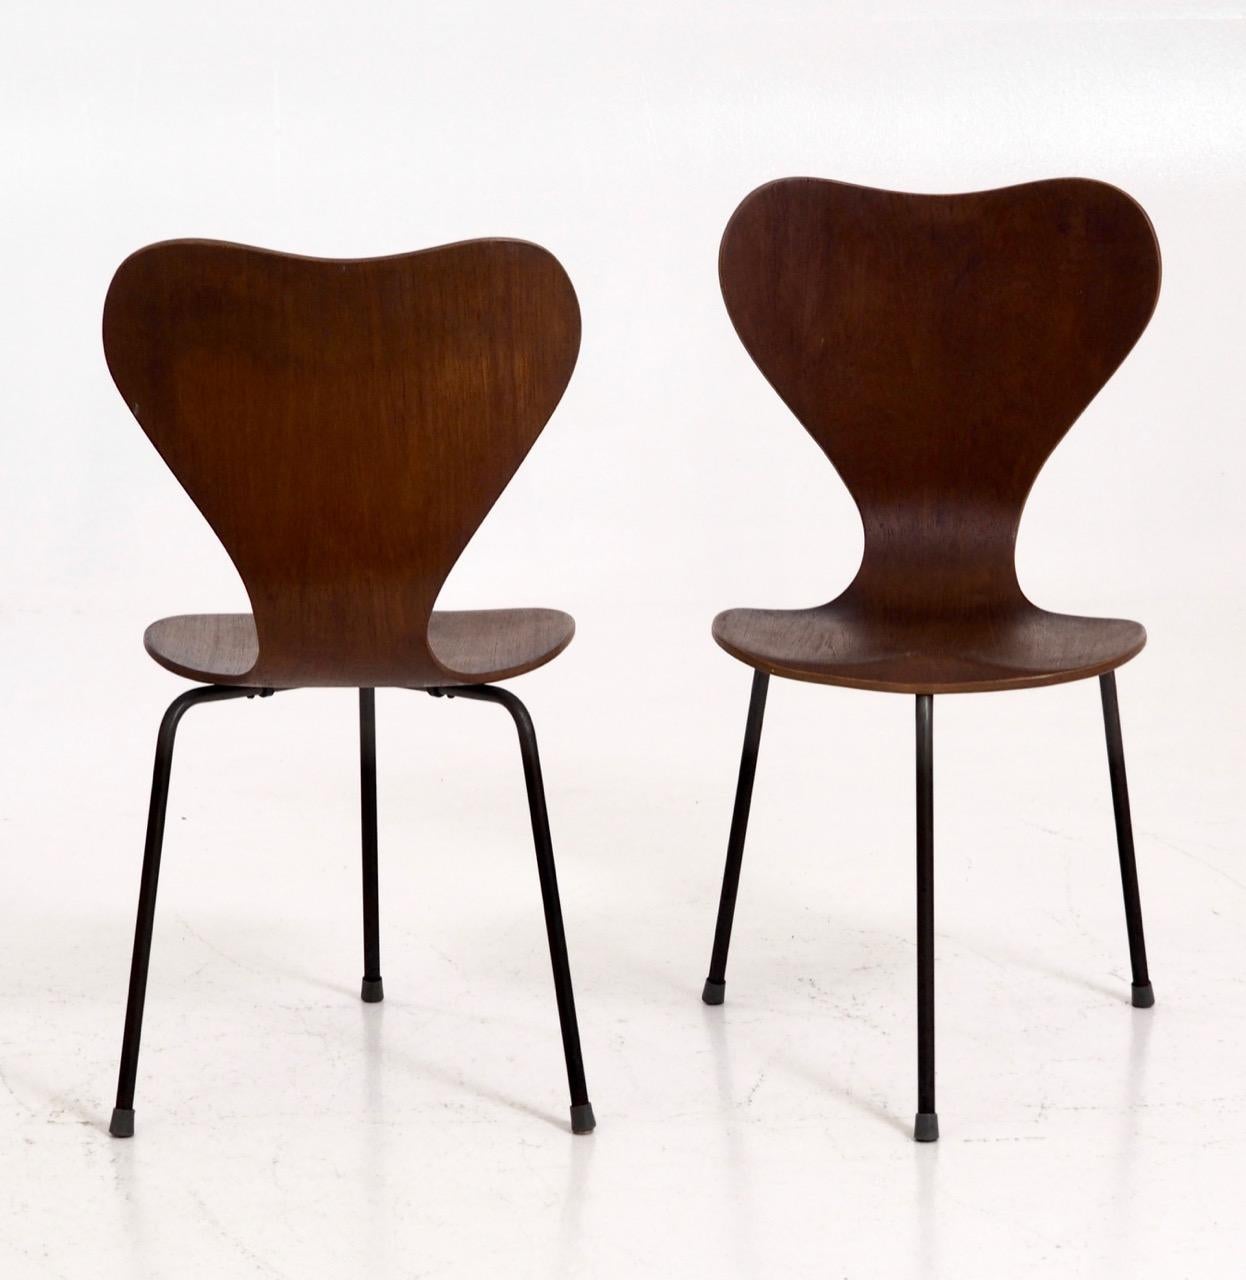 20th Century Pair of Teak Wood Chairs with Three Iron Legs, Danish Architect, 1960s For Sale